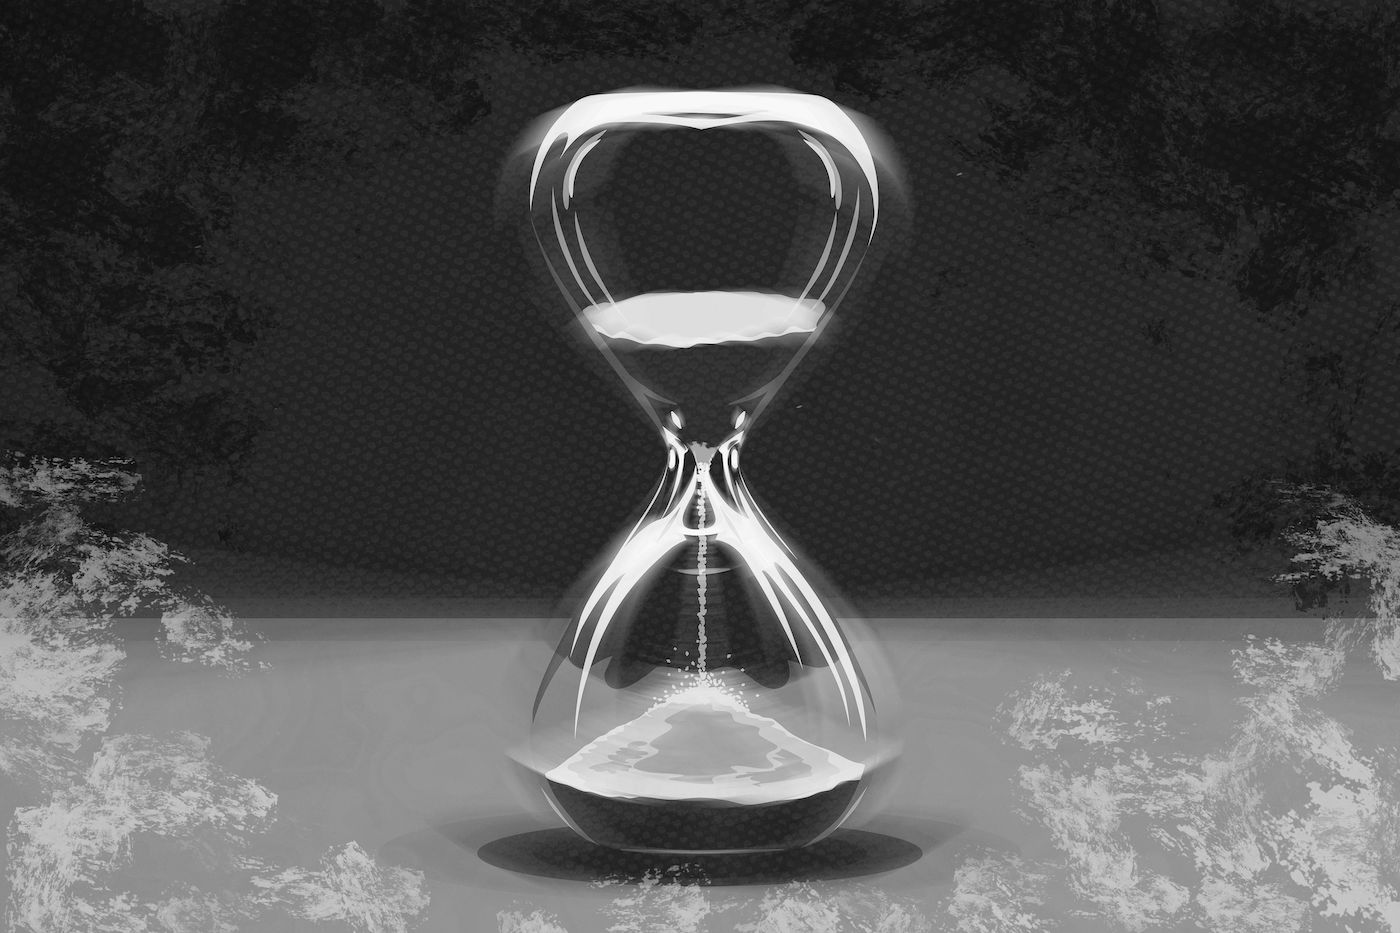 A digital illustration shows a motion - blurred hourglass in stark black and white surrounded by a hand painted border of black and white brush strokes